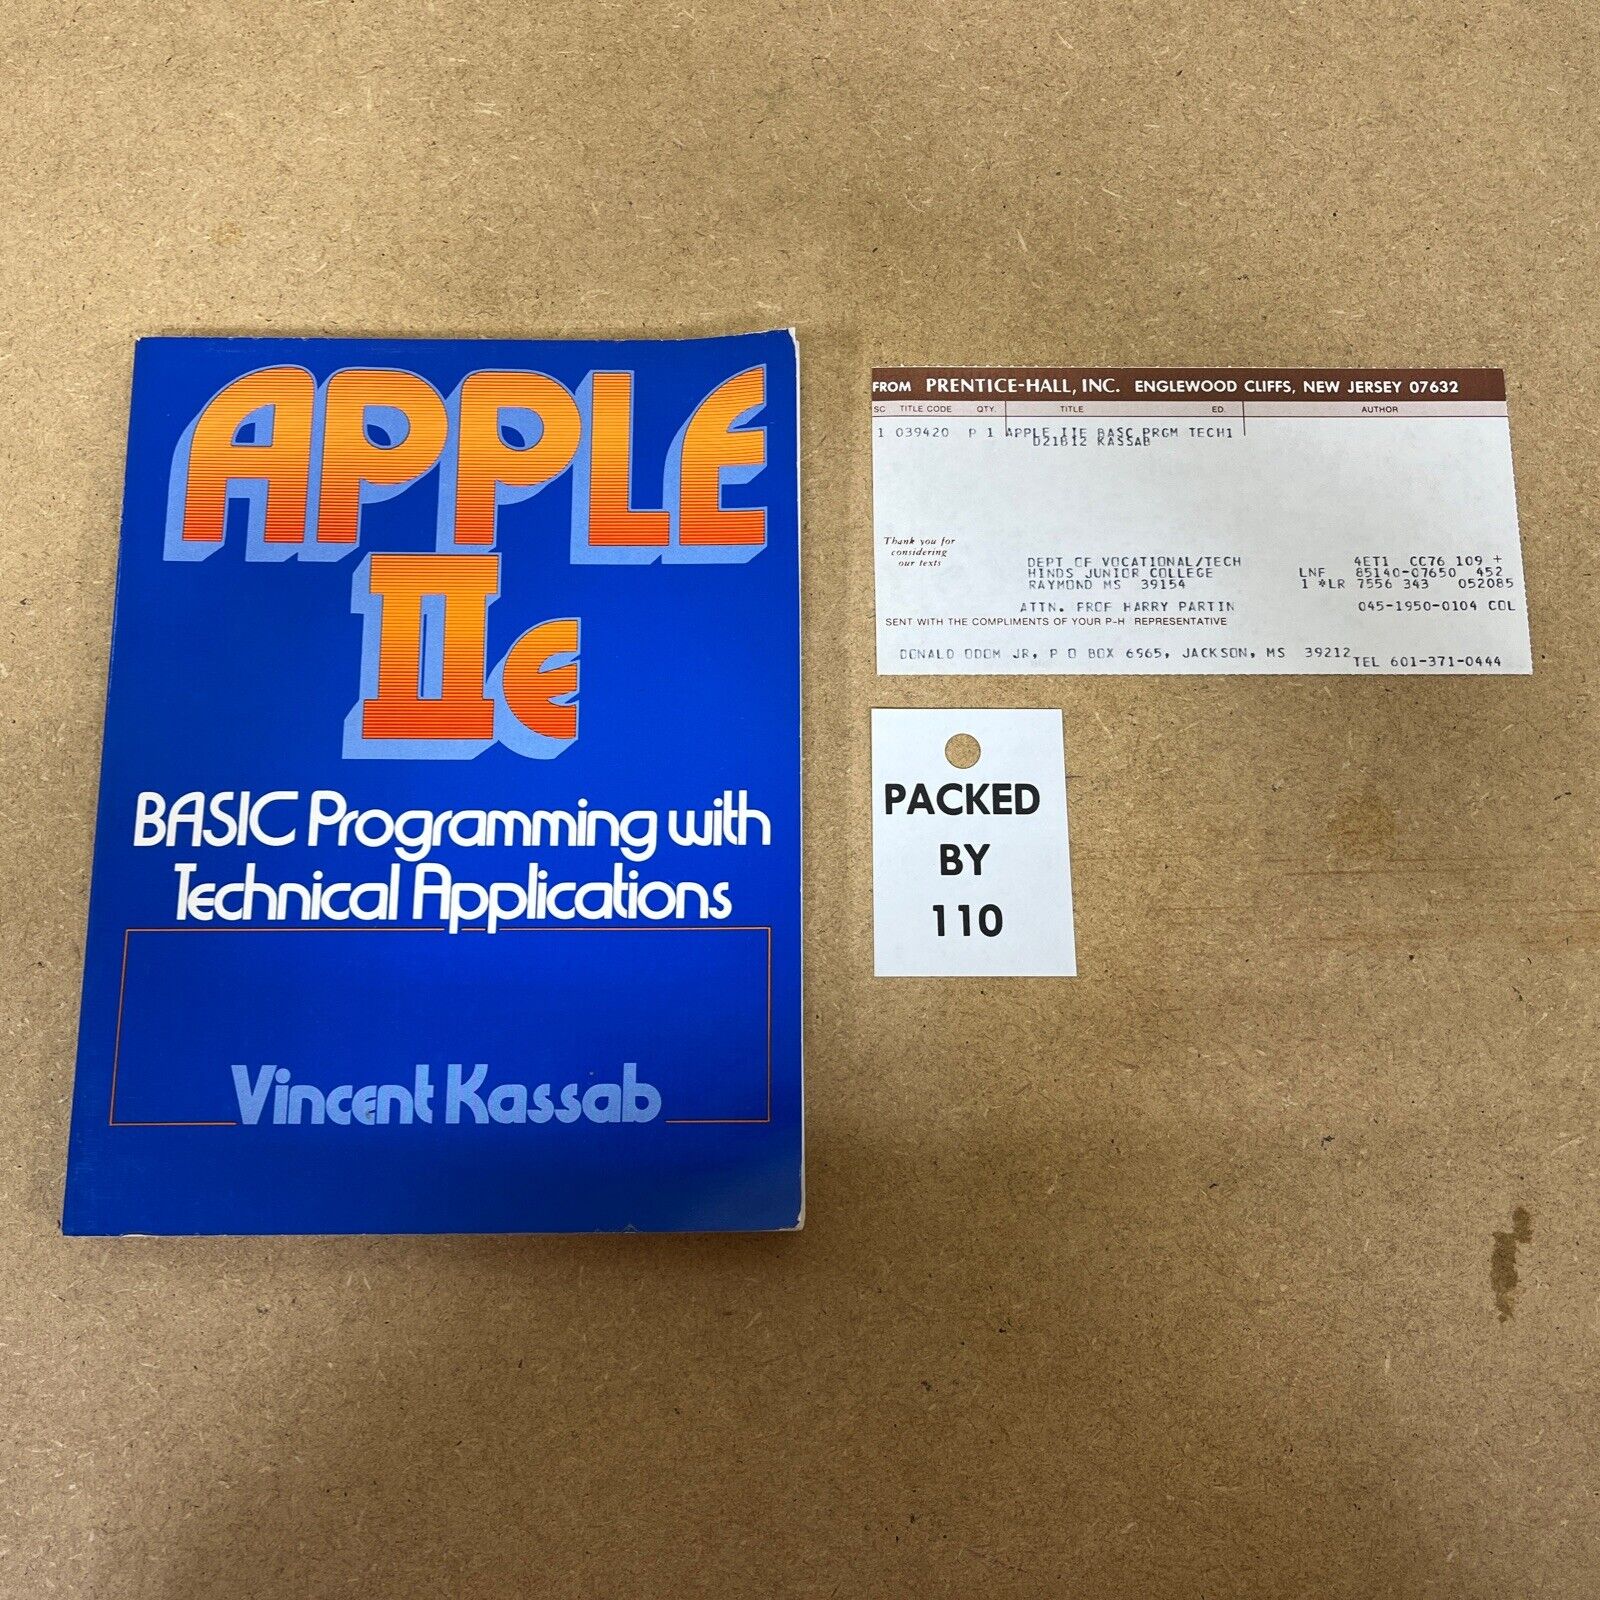 APPLE IIe BASIC PROGRAMMING WITH TECHNICAL APPLICATIONS VINCENT KASSAB SOFT COV